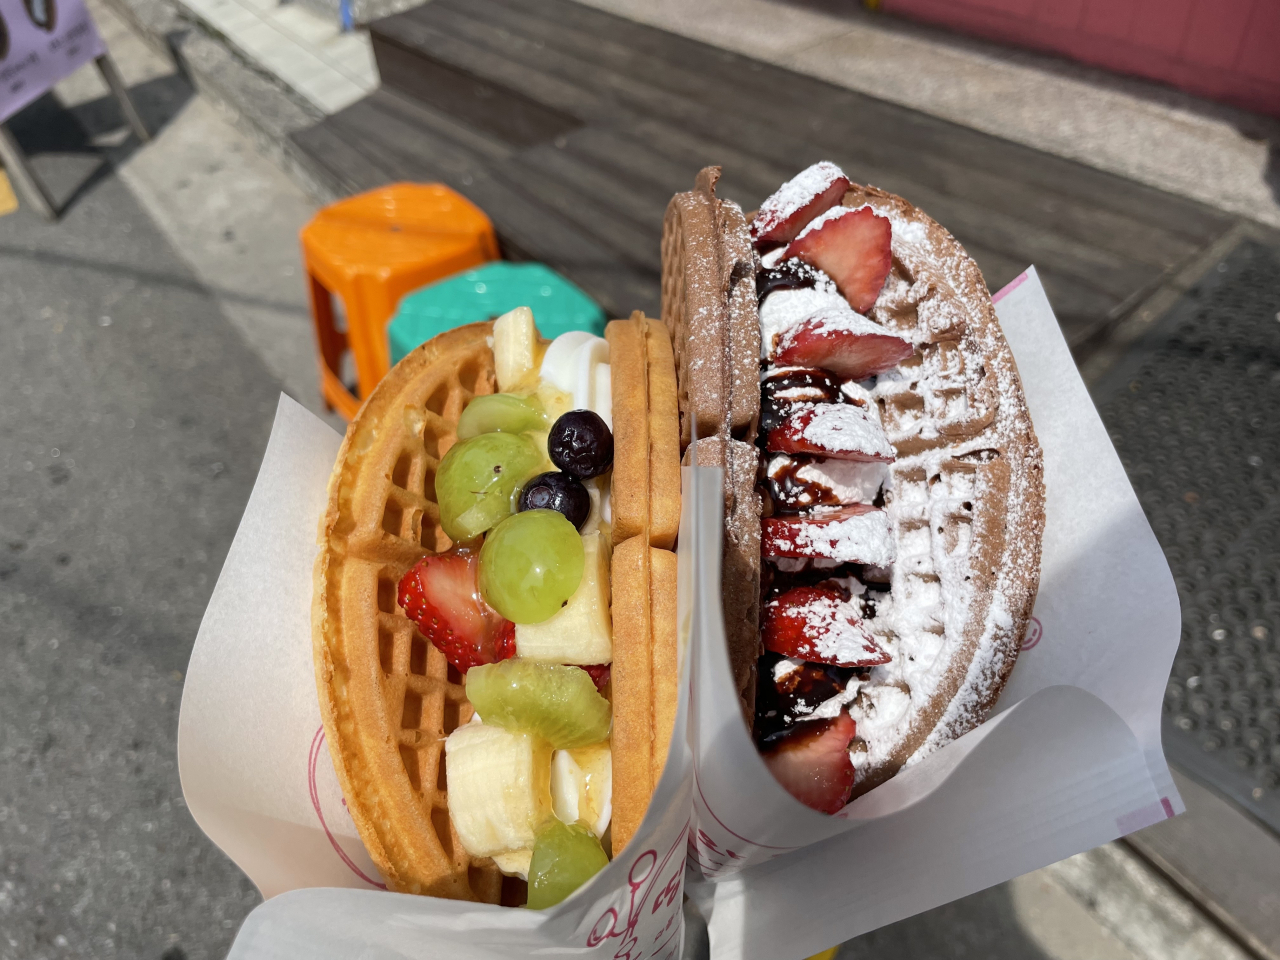 Ddingddong Waffle's signature plain waffle with yogurt ice cream and fruit (left) and cacao waffle with strawberries and chocolate sauce (right). (Kim Da-sol/The Korea Herald)